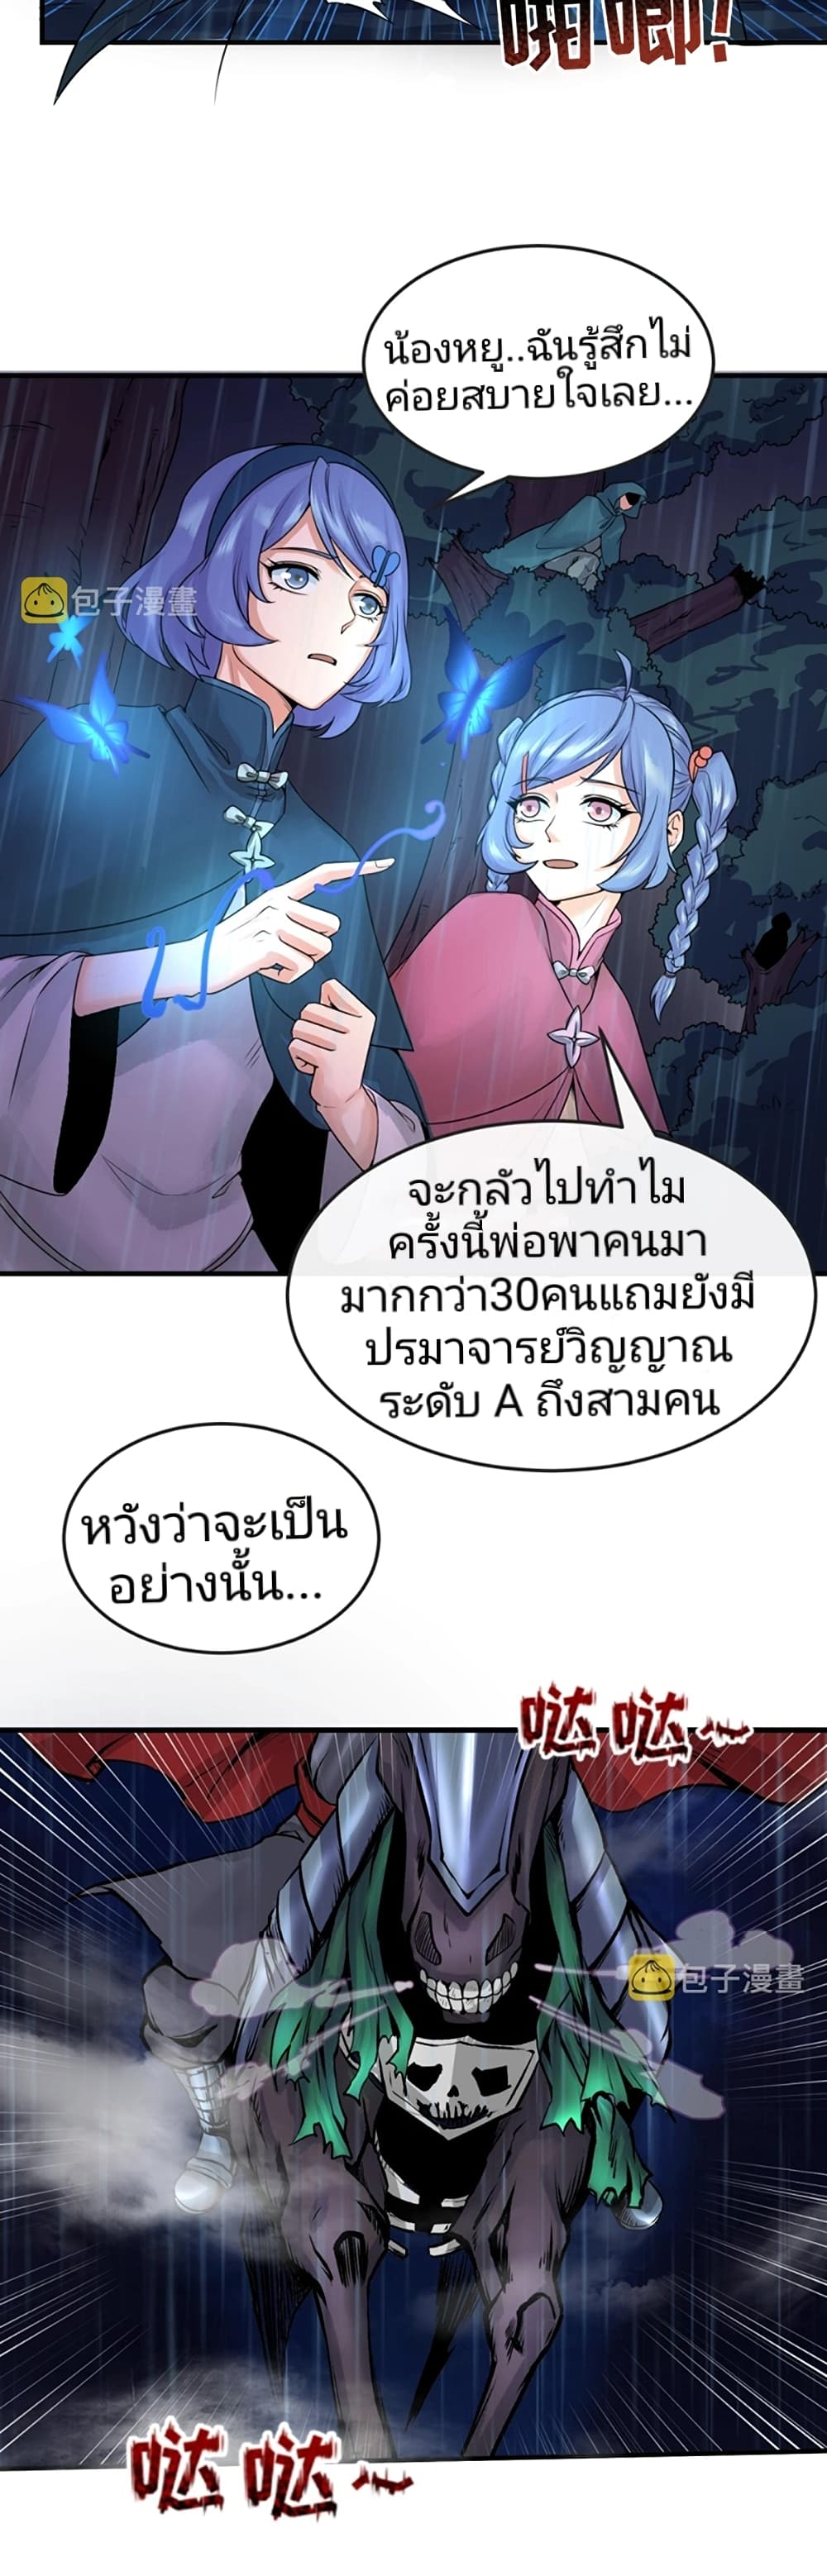 The Age of Ghost Spirits à¸à¸­à¸à¸à¸µà¹ 22 (3)